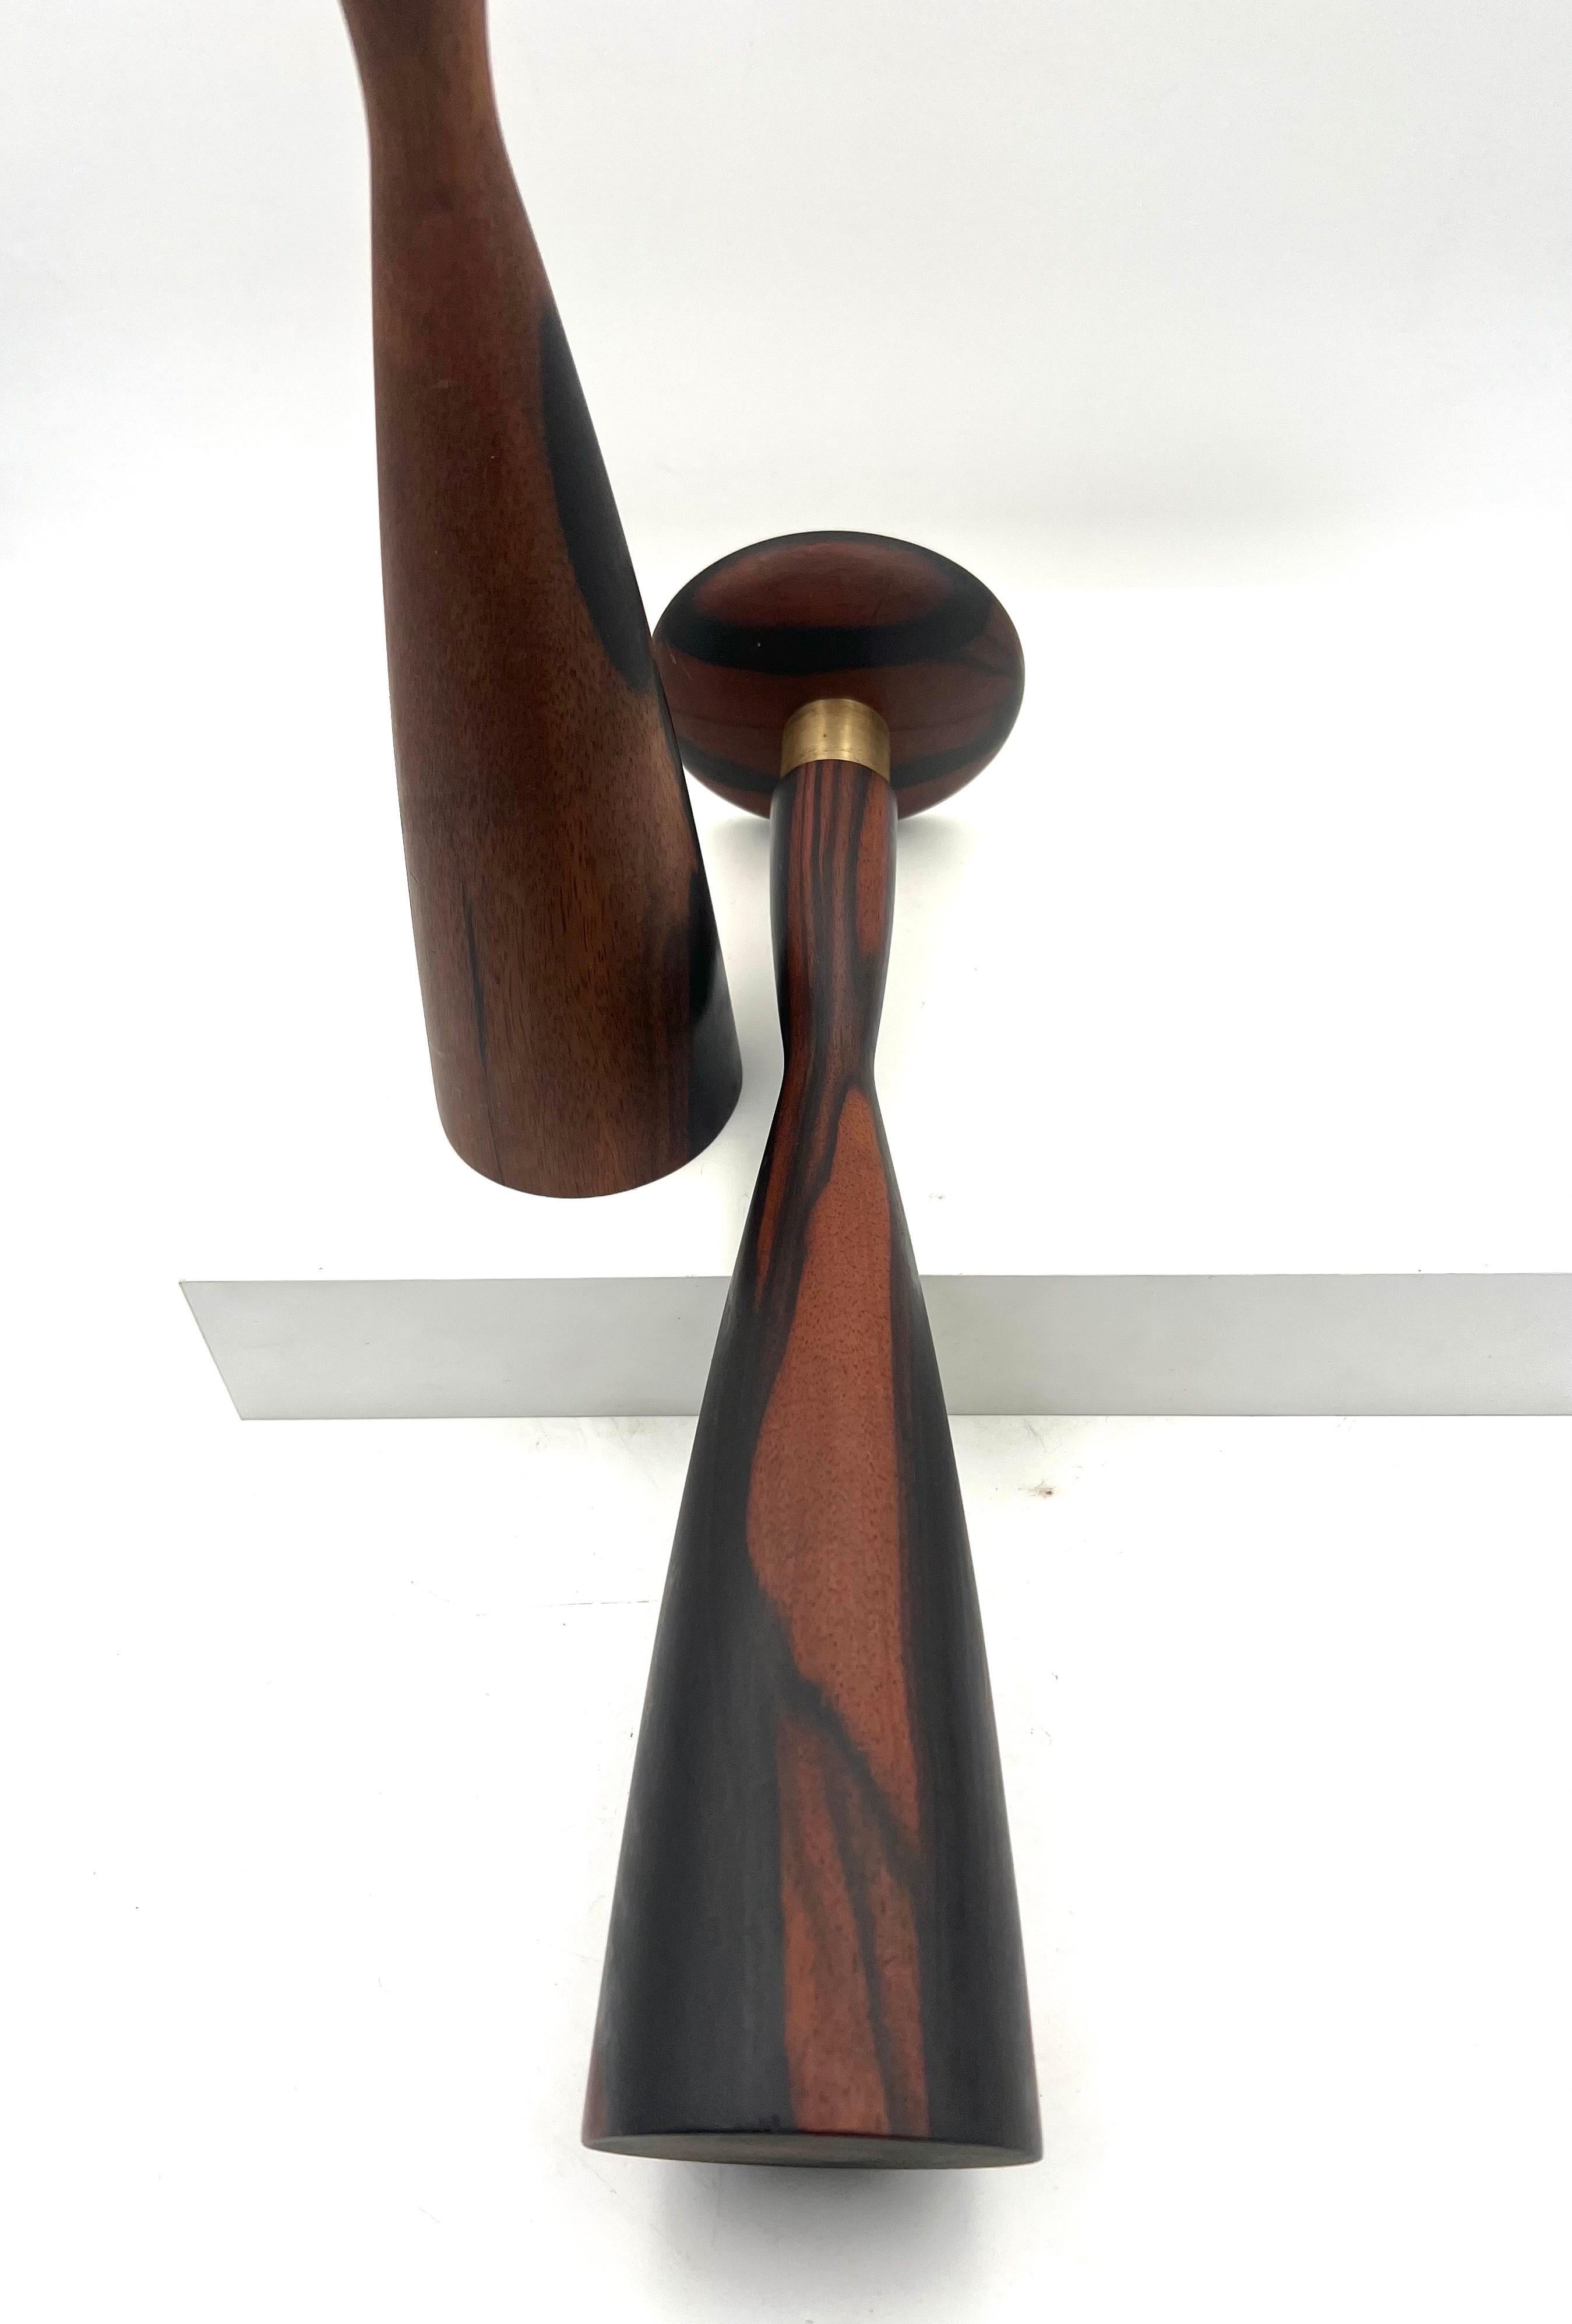 Majestic Solid Rosewood Tall Candle Holders Danish Modern In Excellent Condition For Sale In San Diego, CA